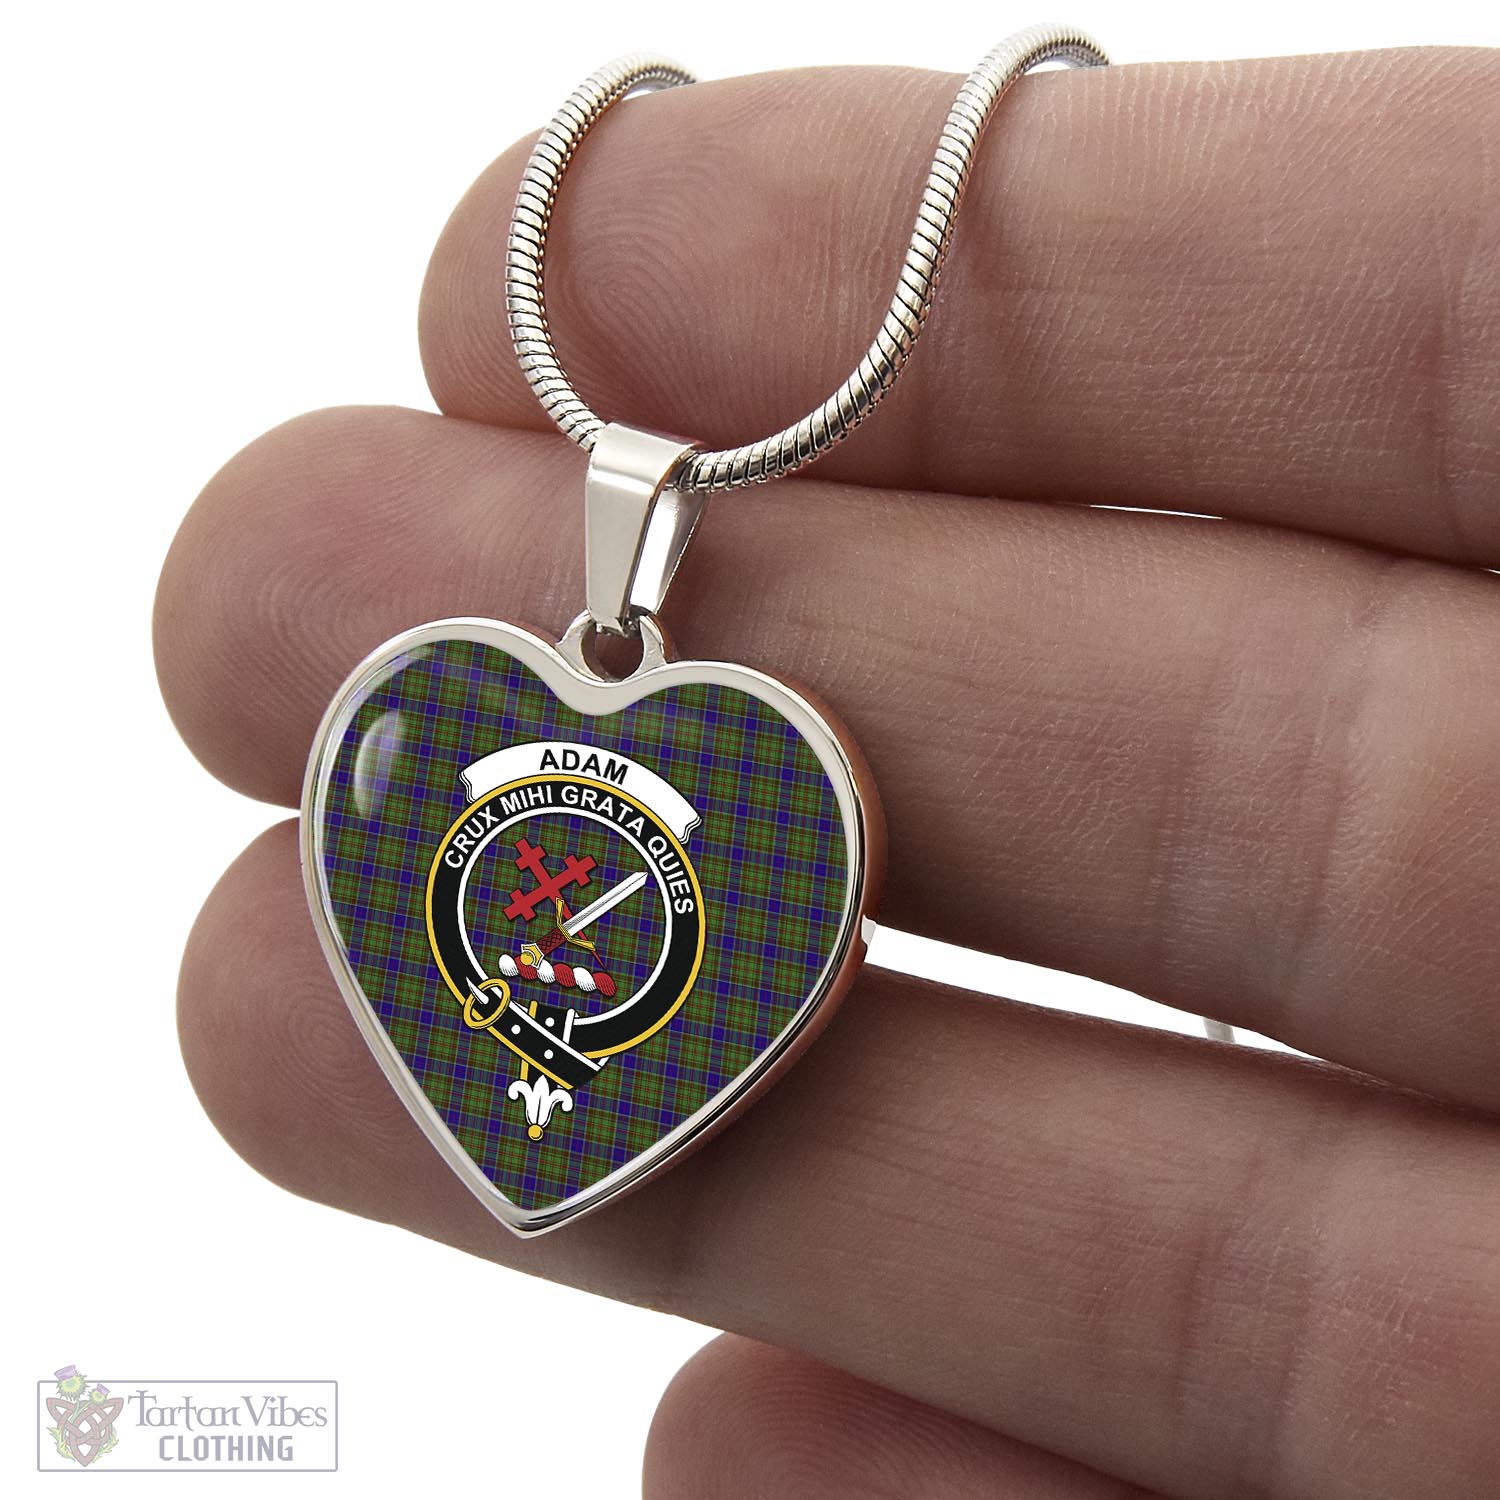 Tartan Vibes Clothing Adam Tartan Heart Necklace with Family Crest